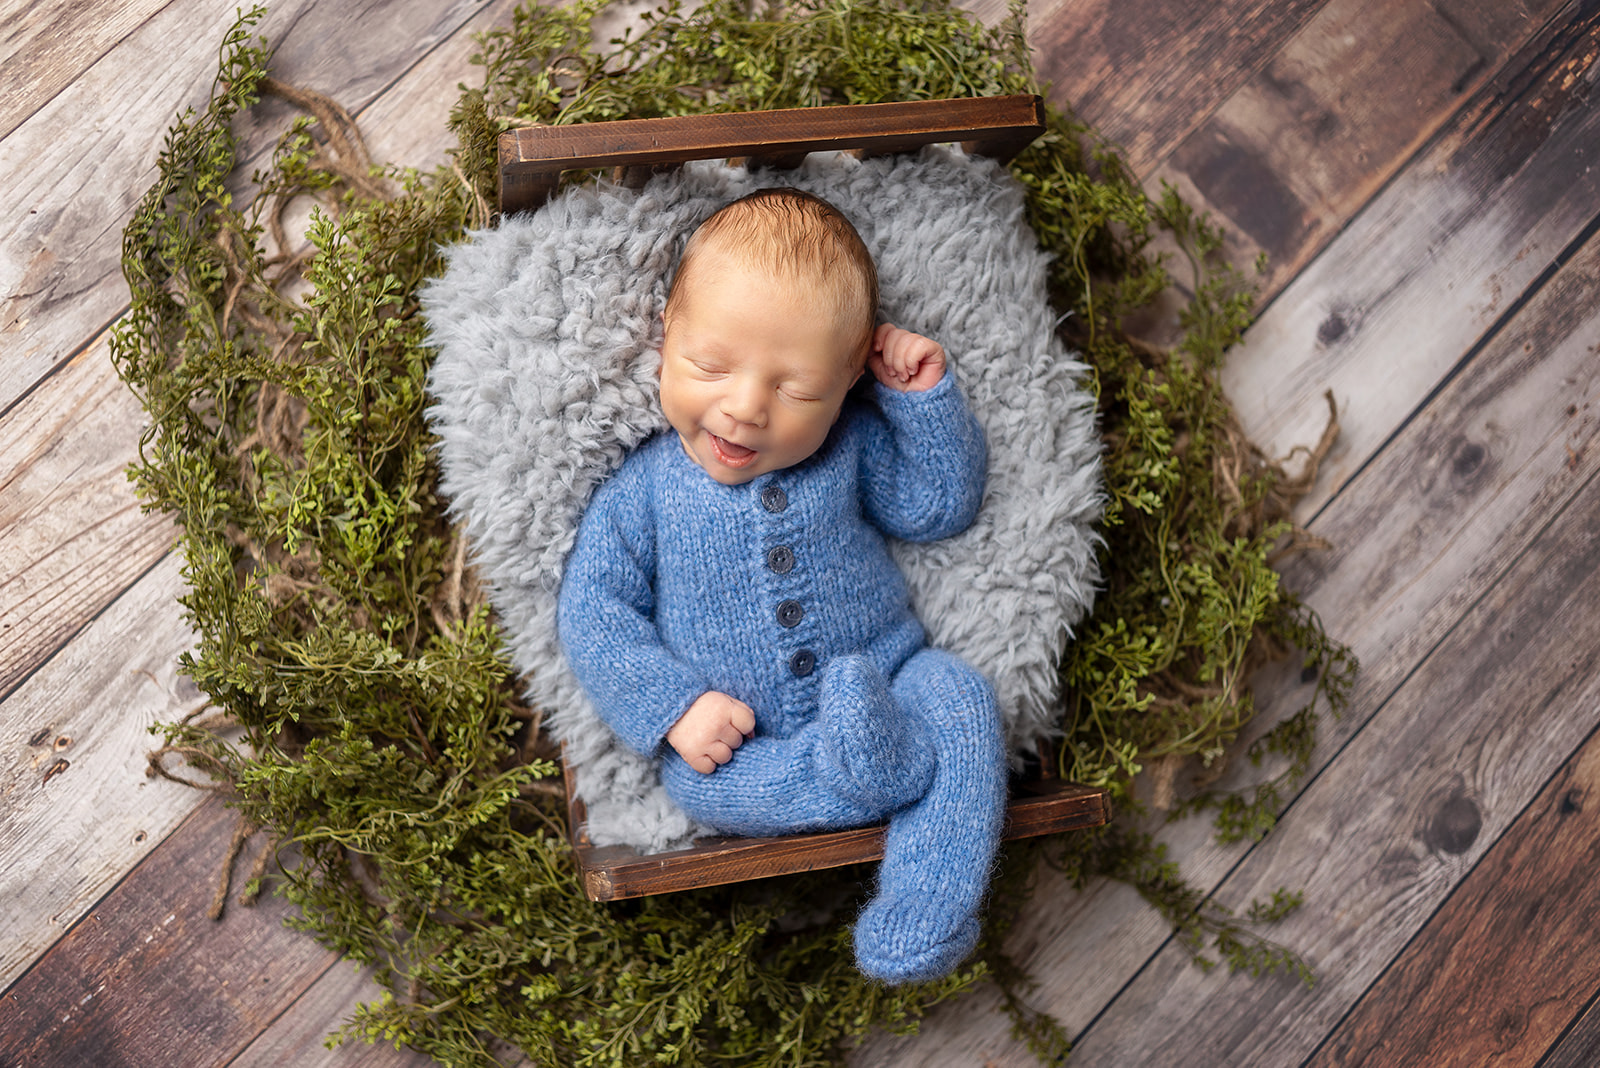 Newborn boy at Celesta Champagne Photography studio sleeping in a blue knit outfit